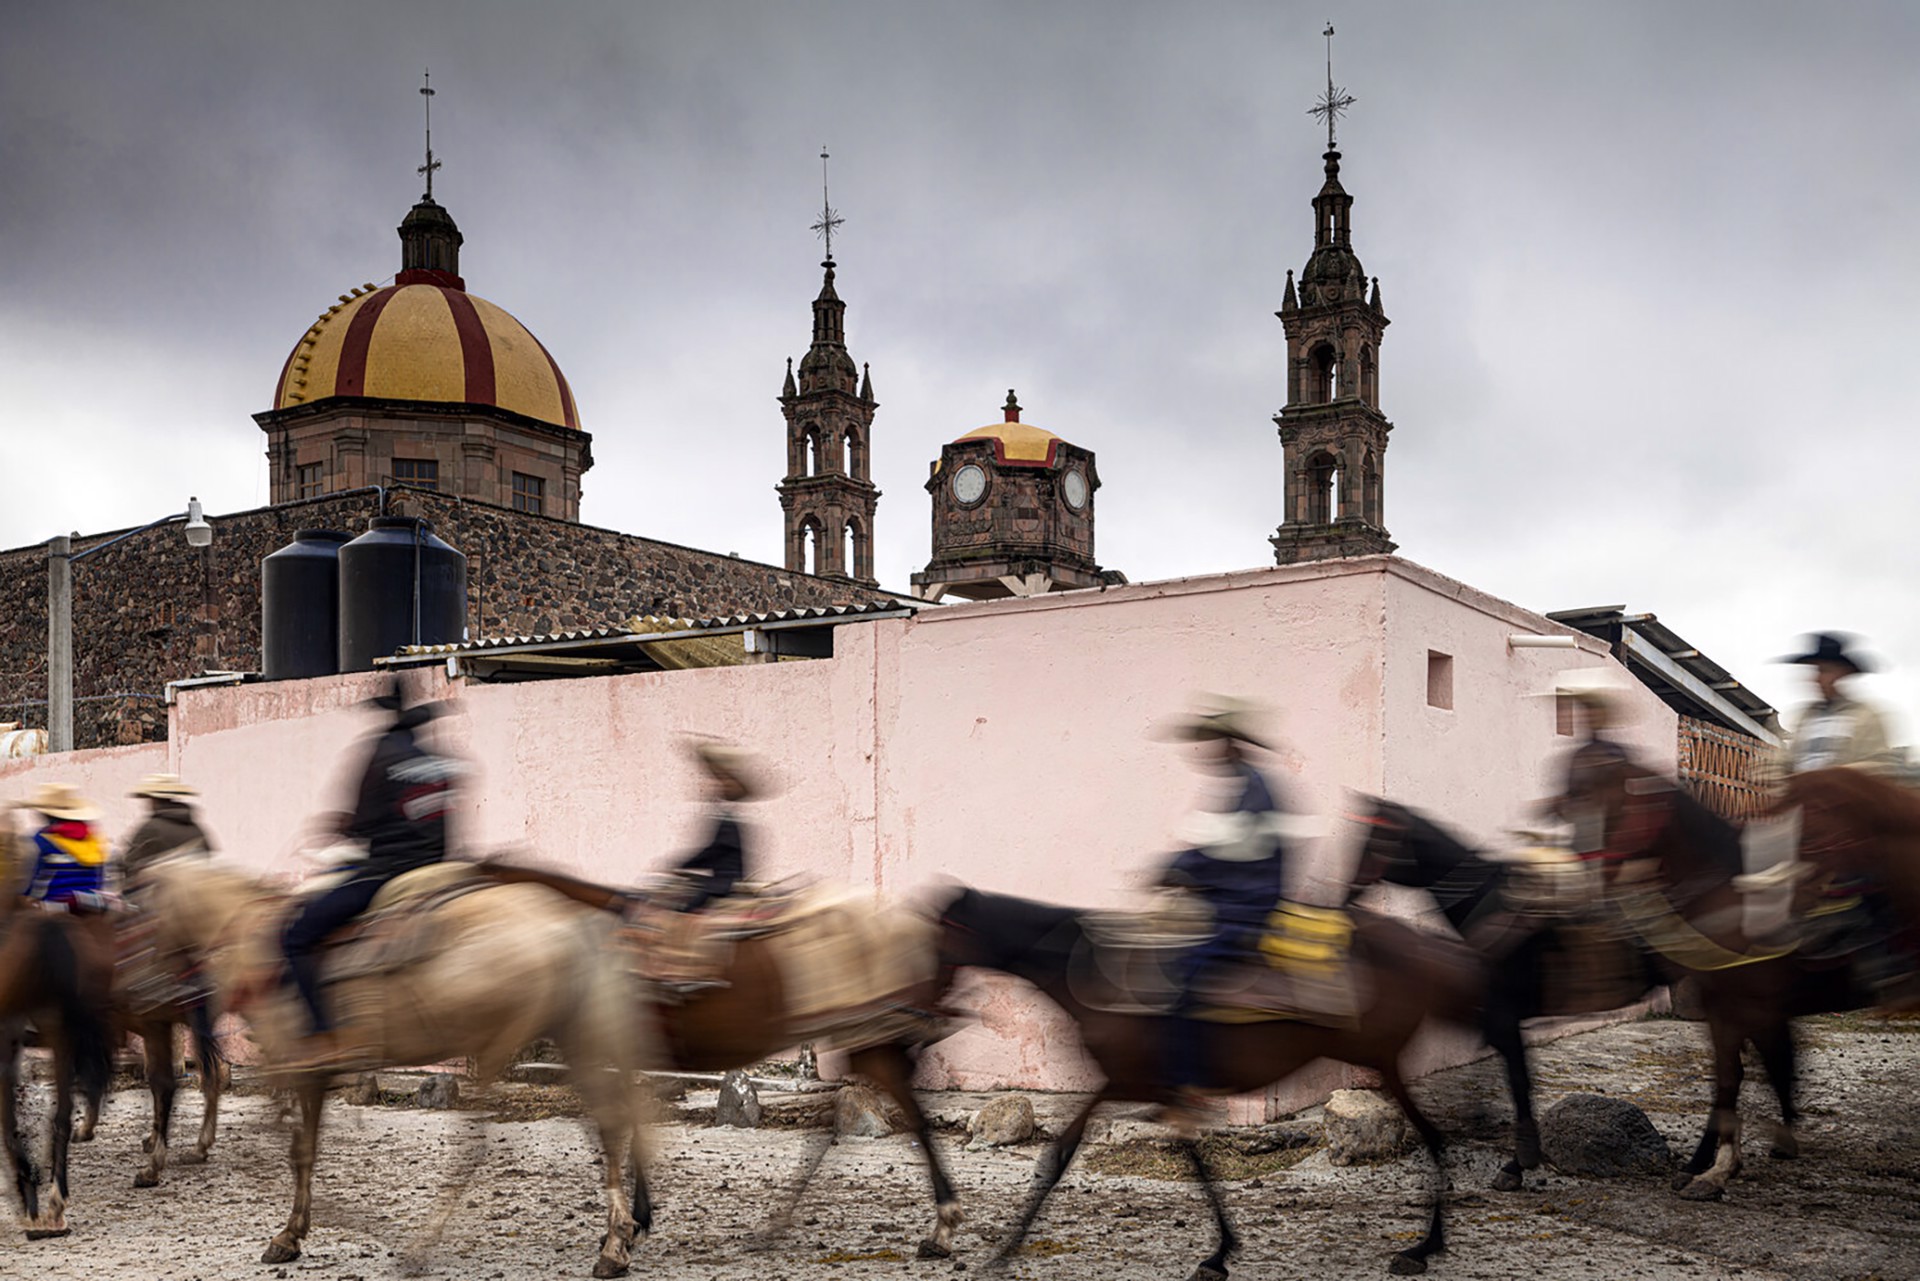 Horse Pilgrimage - San Martin, Mexico by Kevin Greenblat